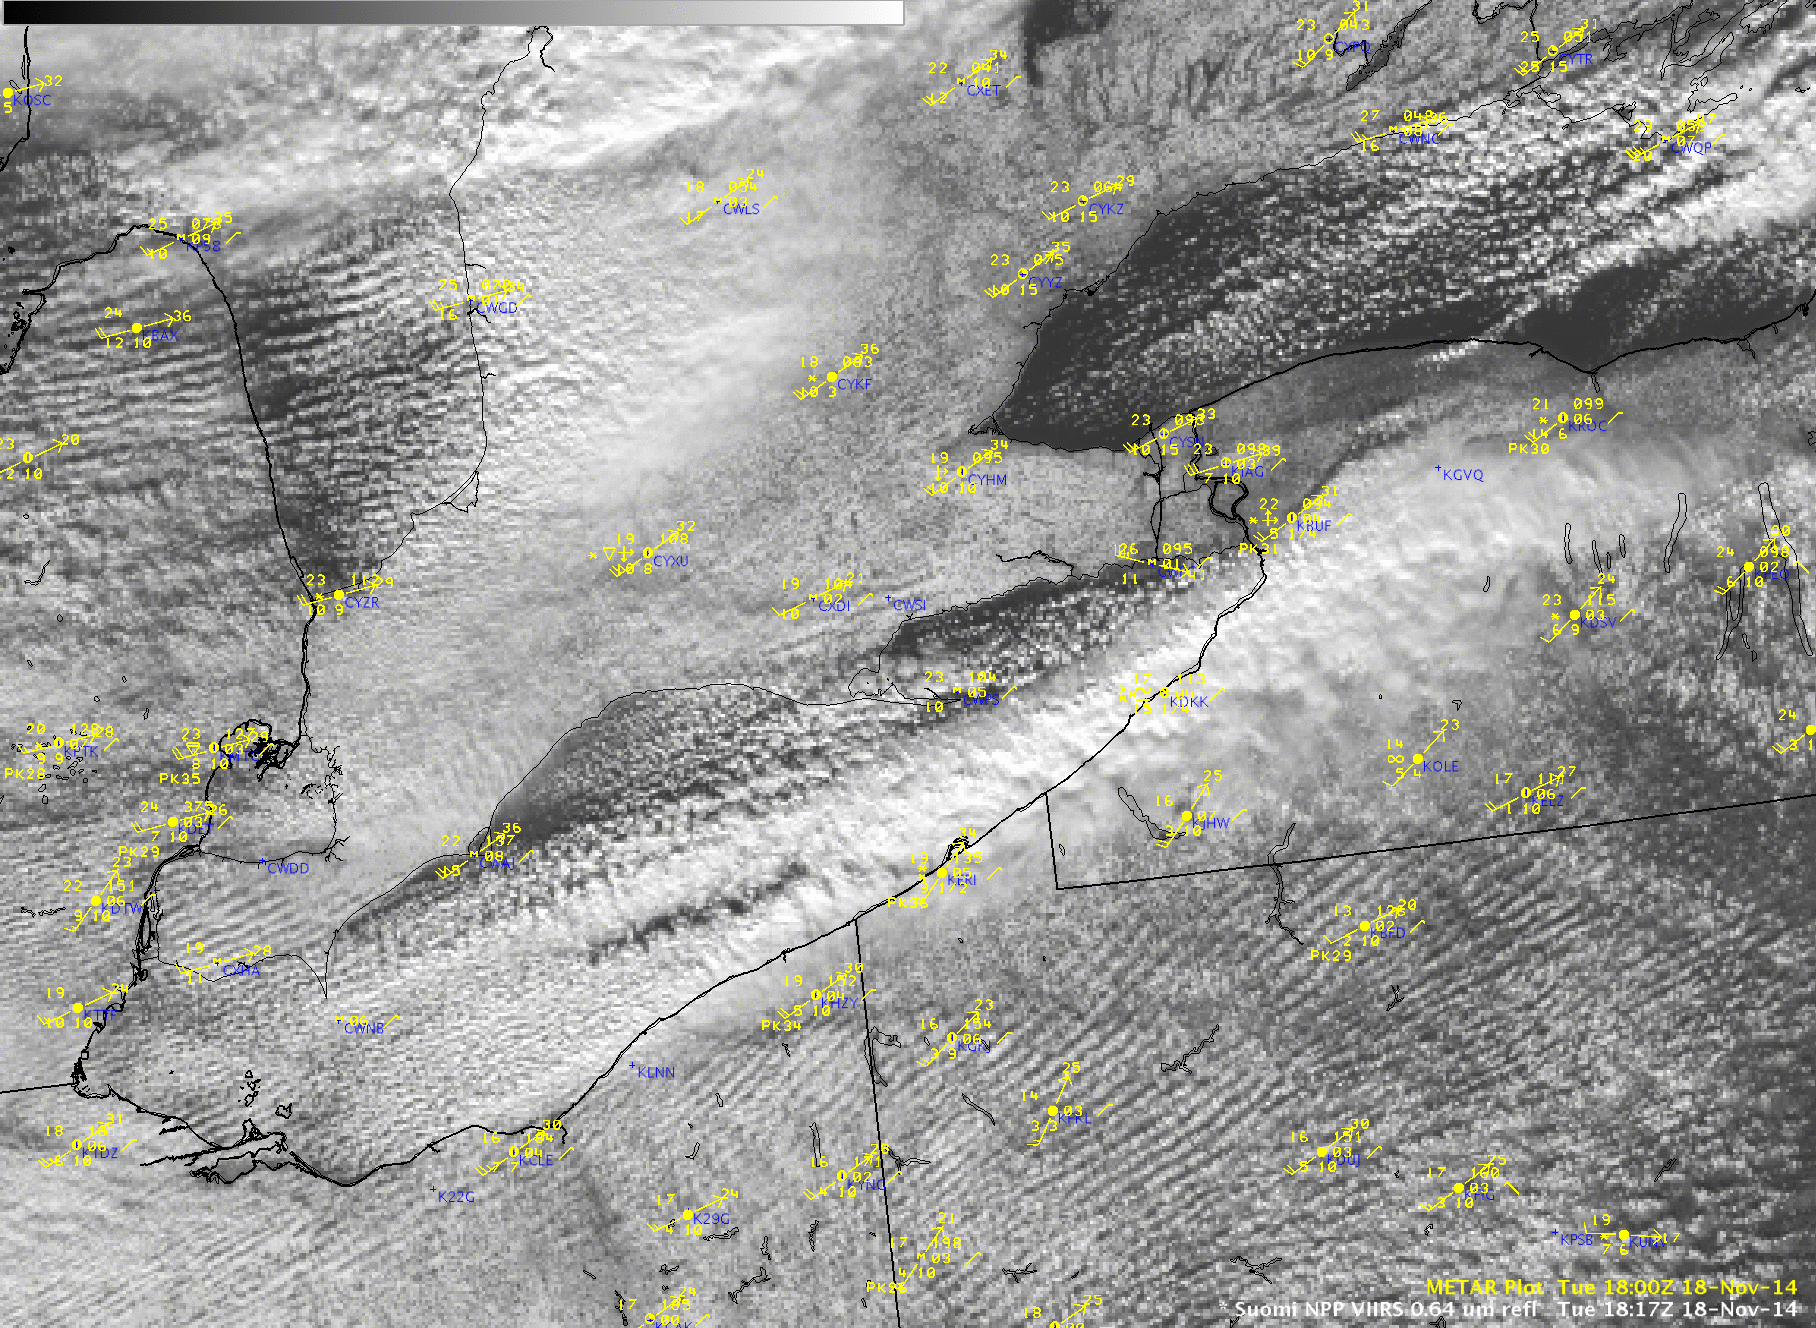 Suomi NPP VIIRS 0.64 µm visible channel and 11.45 µm IR channel images